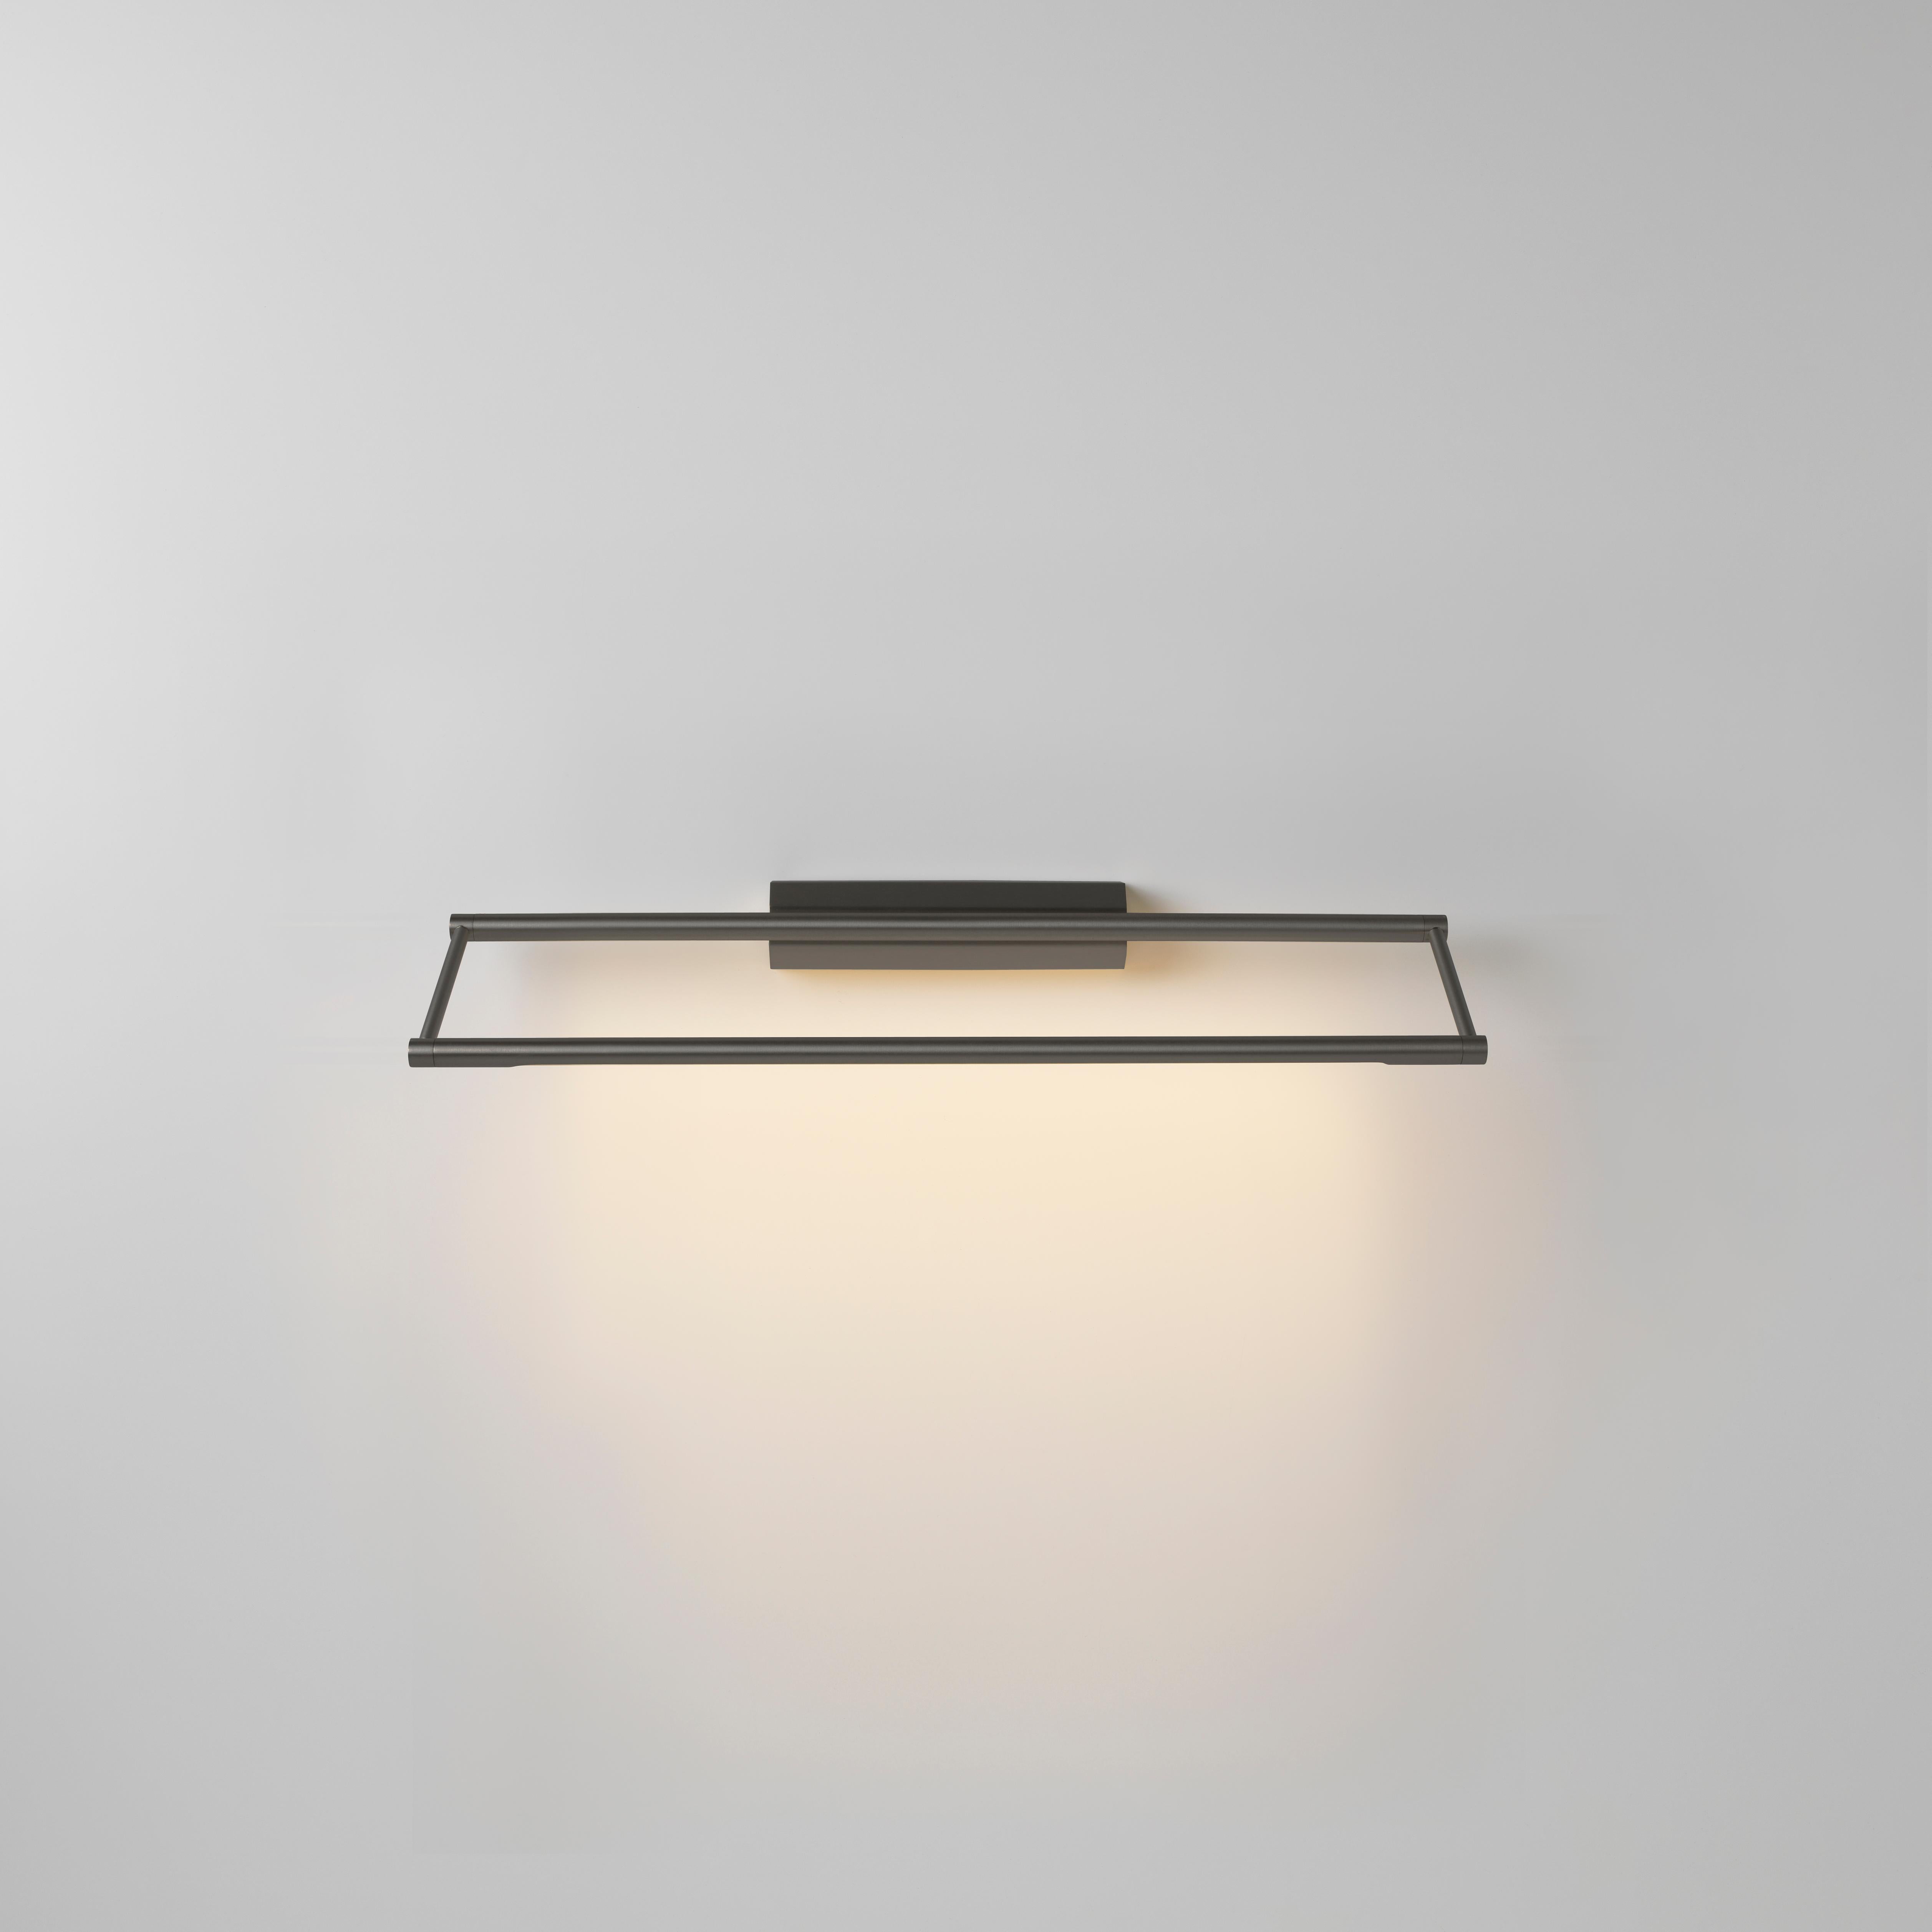 Link 525 graphite wall light by Emilie Cathelineau
Dimensions: D52.5 x W11.5 X H4.4 cm
Materials: Solid brass, satin polycarbonate diffuser, black textile cable (2m)
Others finishes and dimensions are available. 

All our lamps can be wired